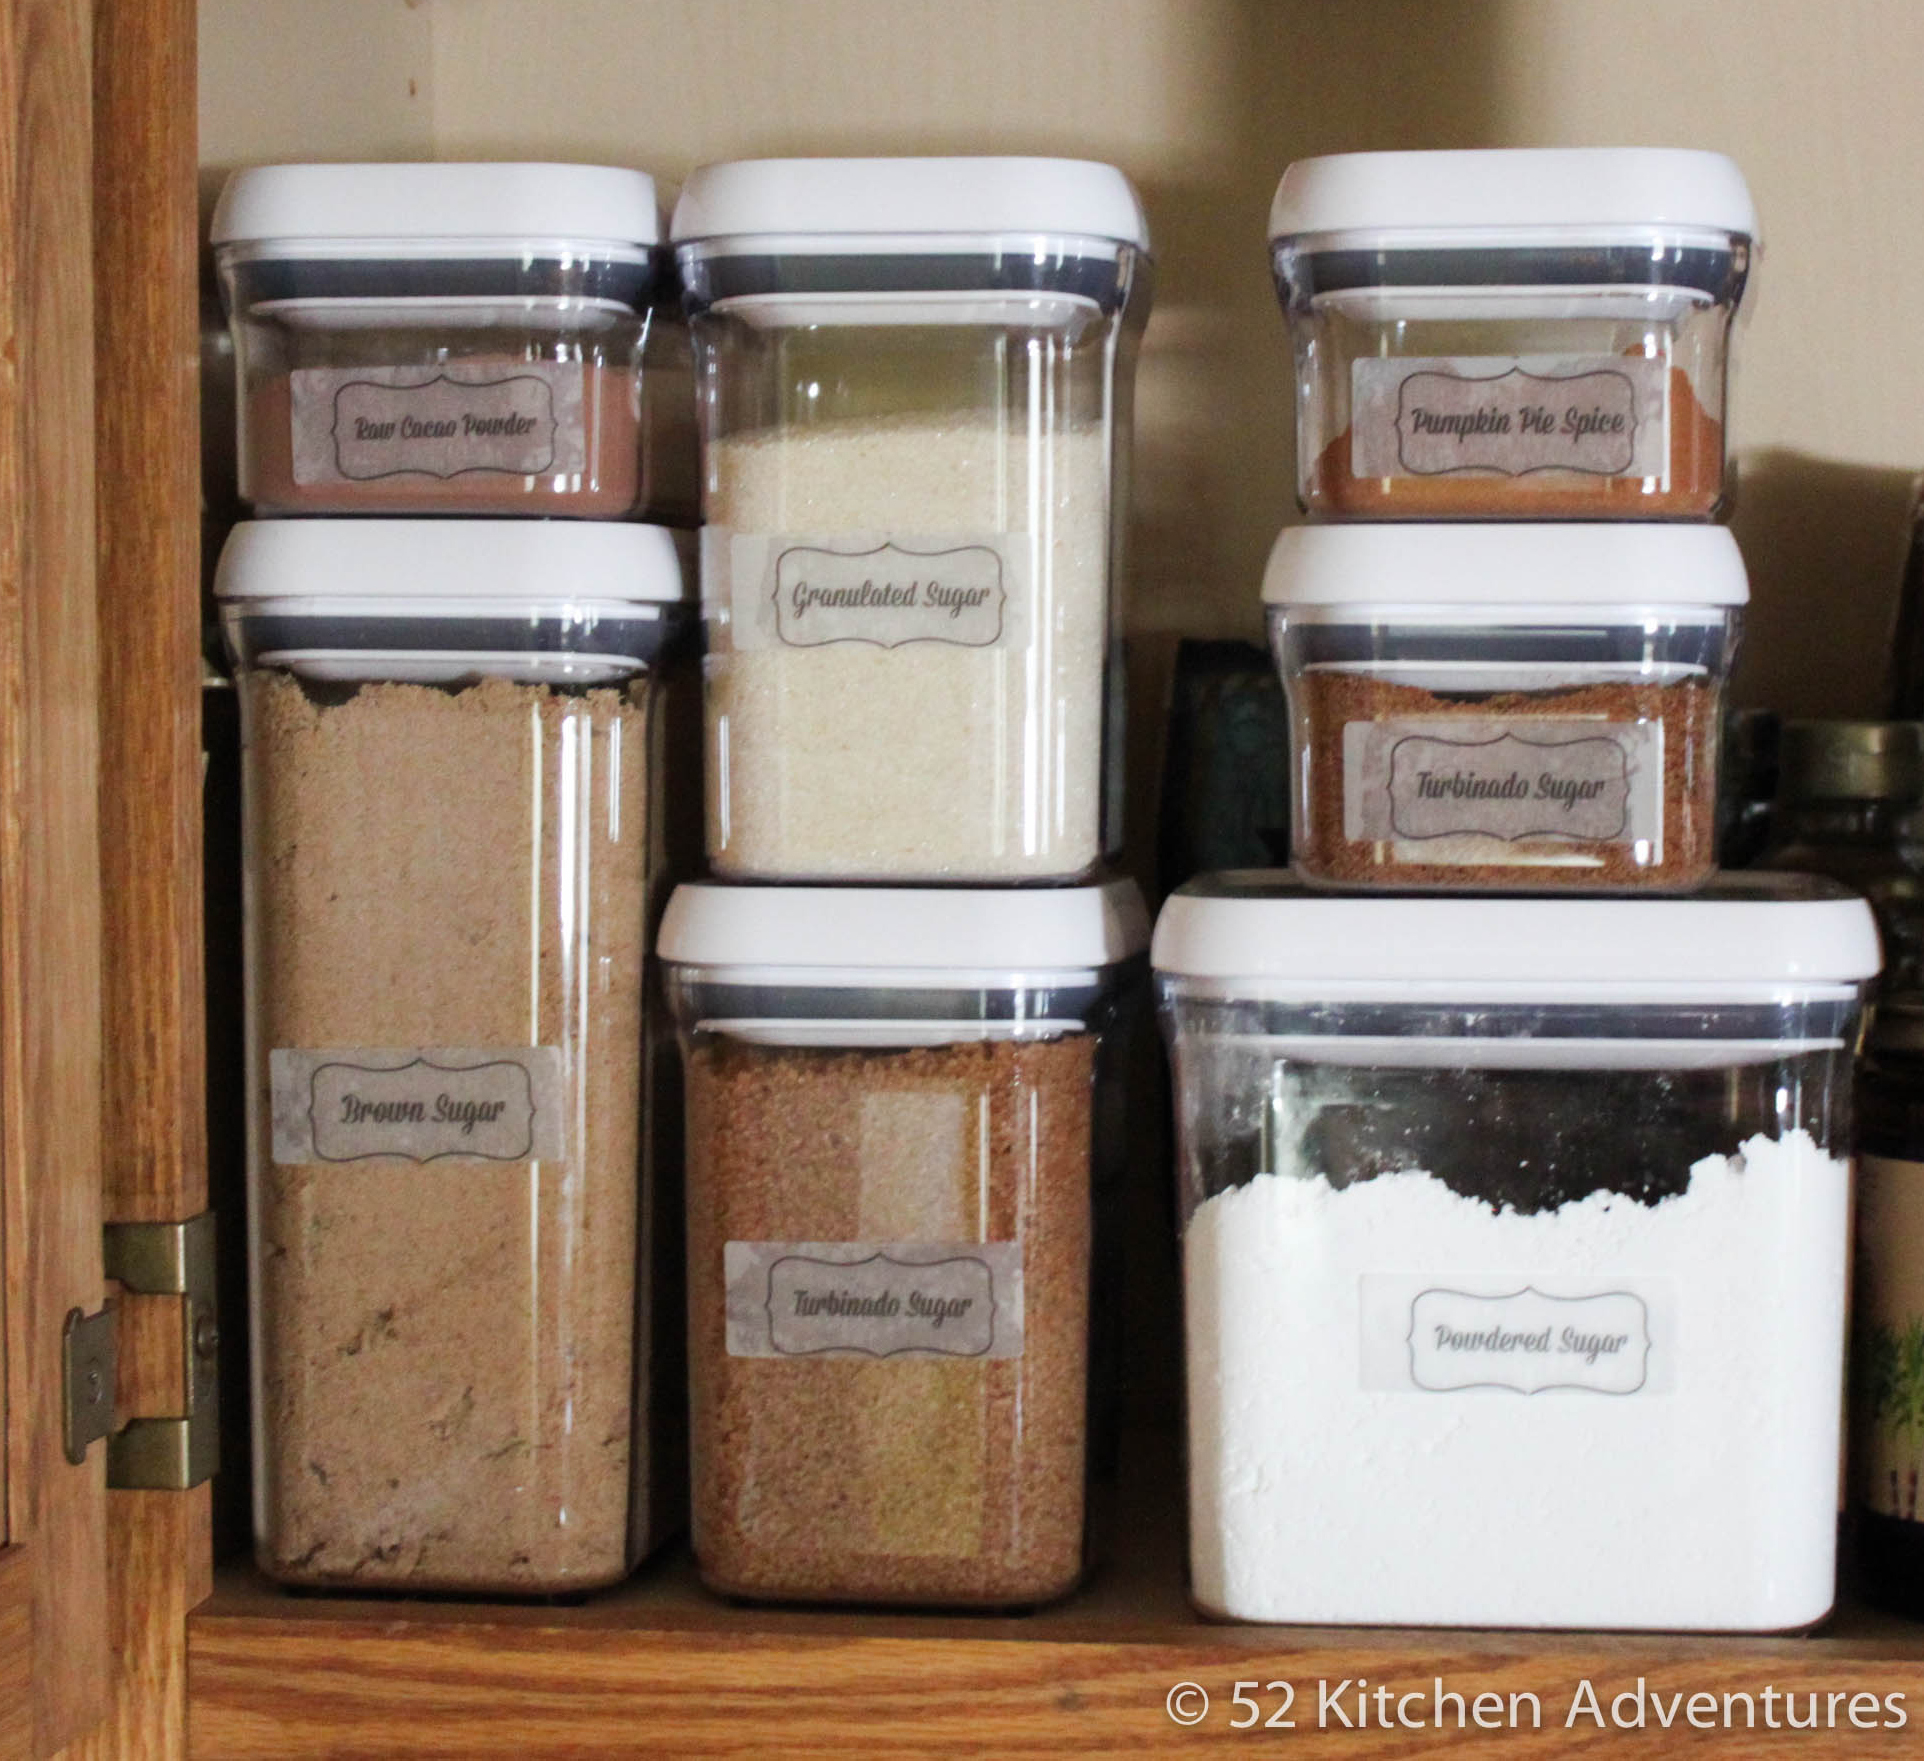 The Best Storage Solution for Storing Bulk Baking Supplies - Practical  Perfection